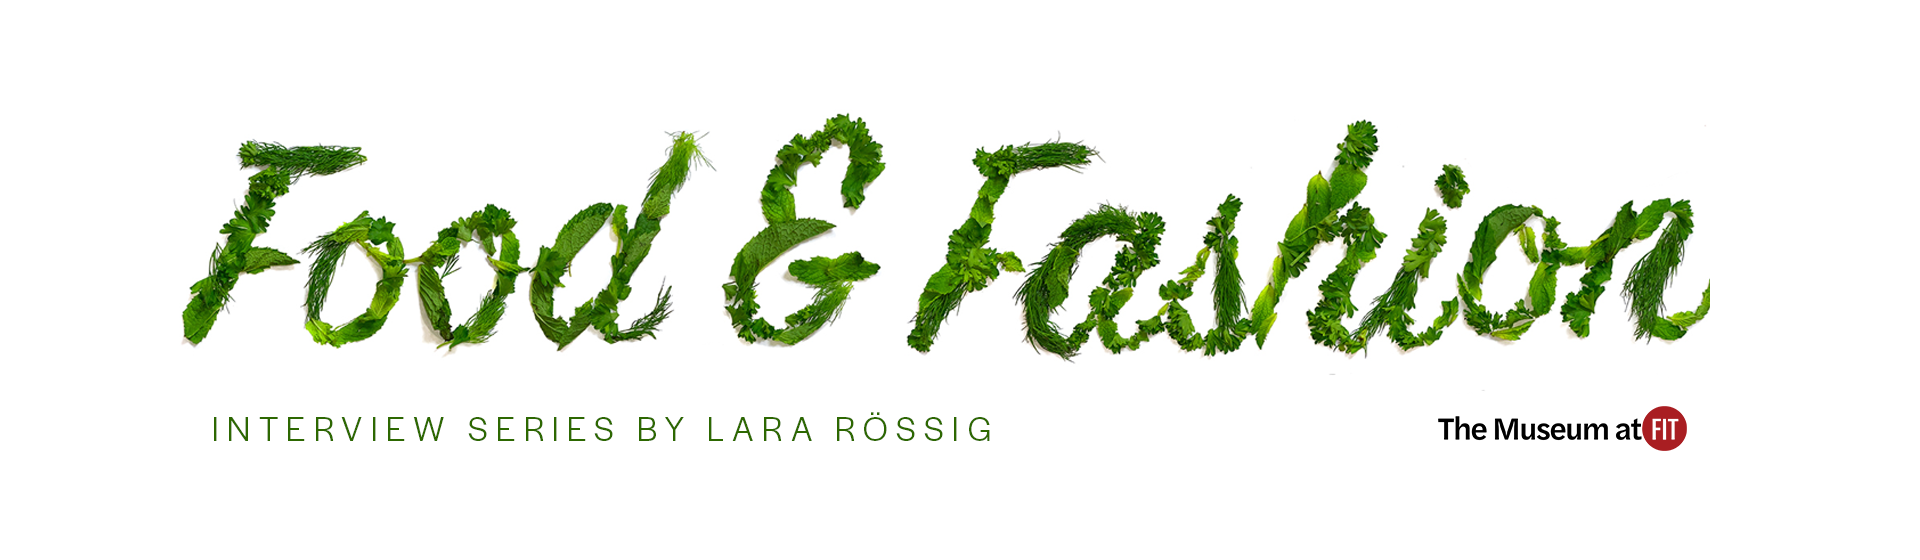 the text "Food and Fashion" in green produce font